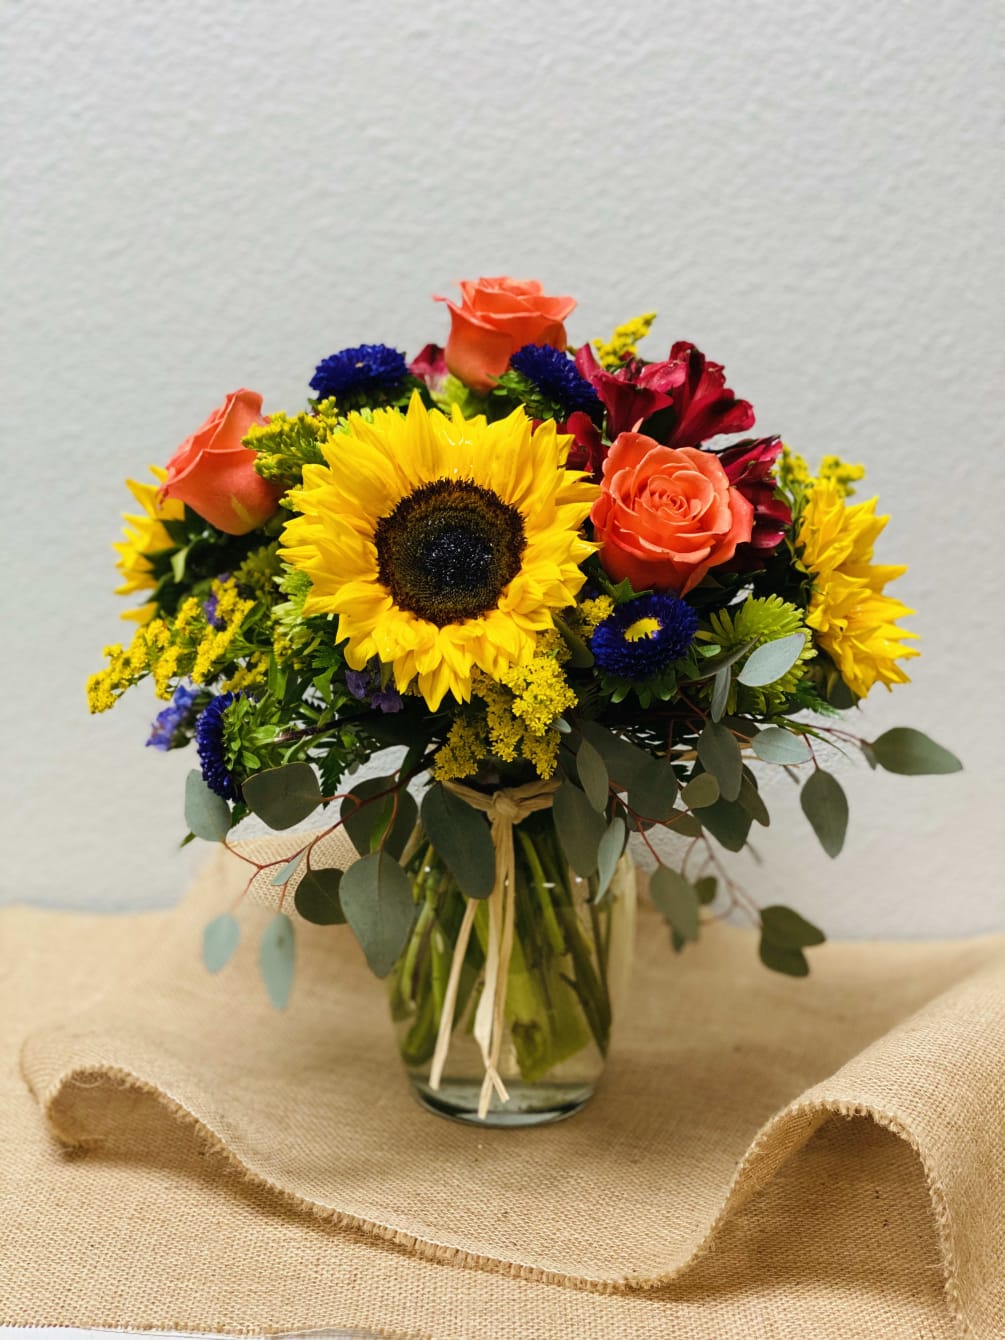 Beautiful arrangement of Roses and sunflowers.